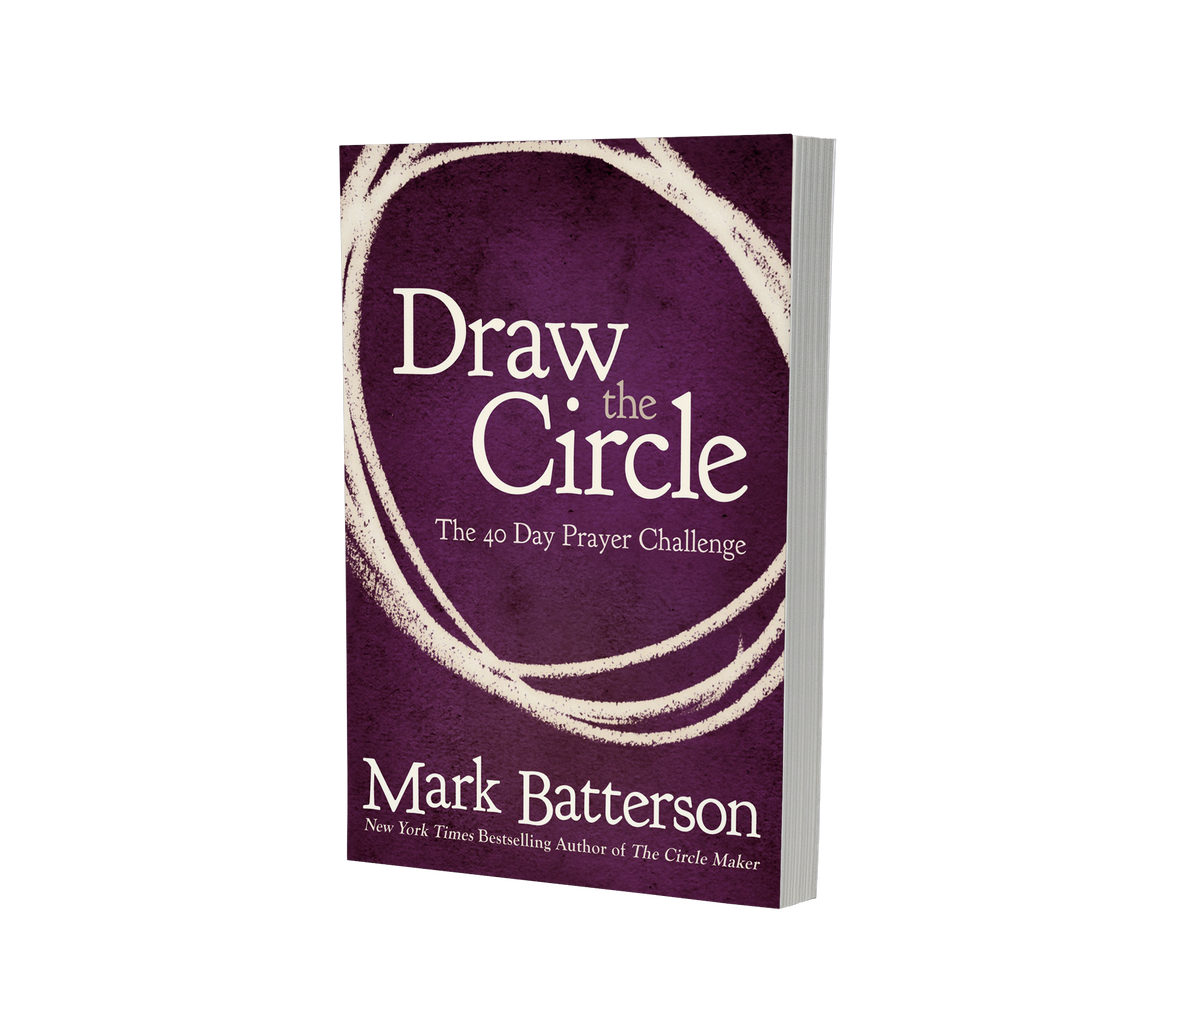 Draw the Circle by Mark Batterson - Audiobook 